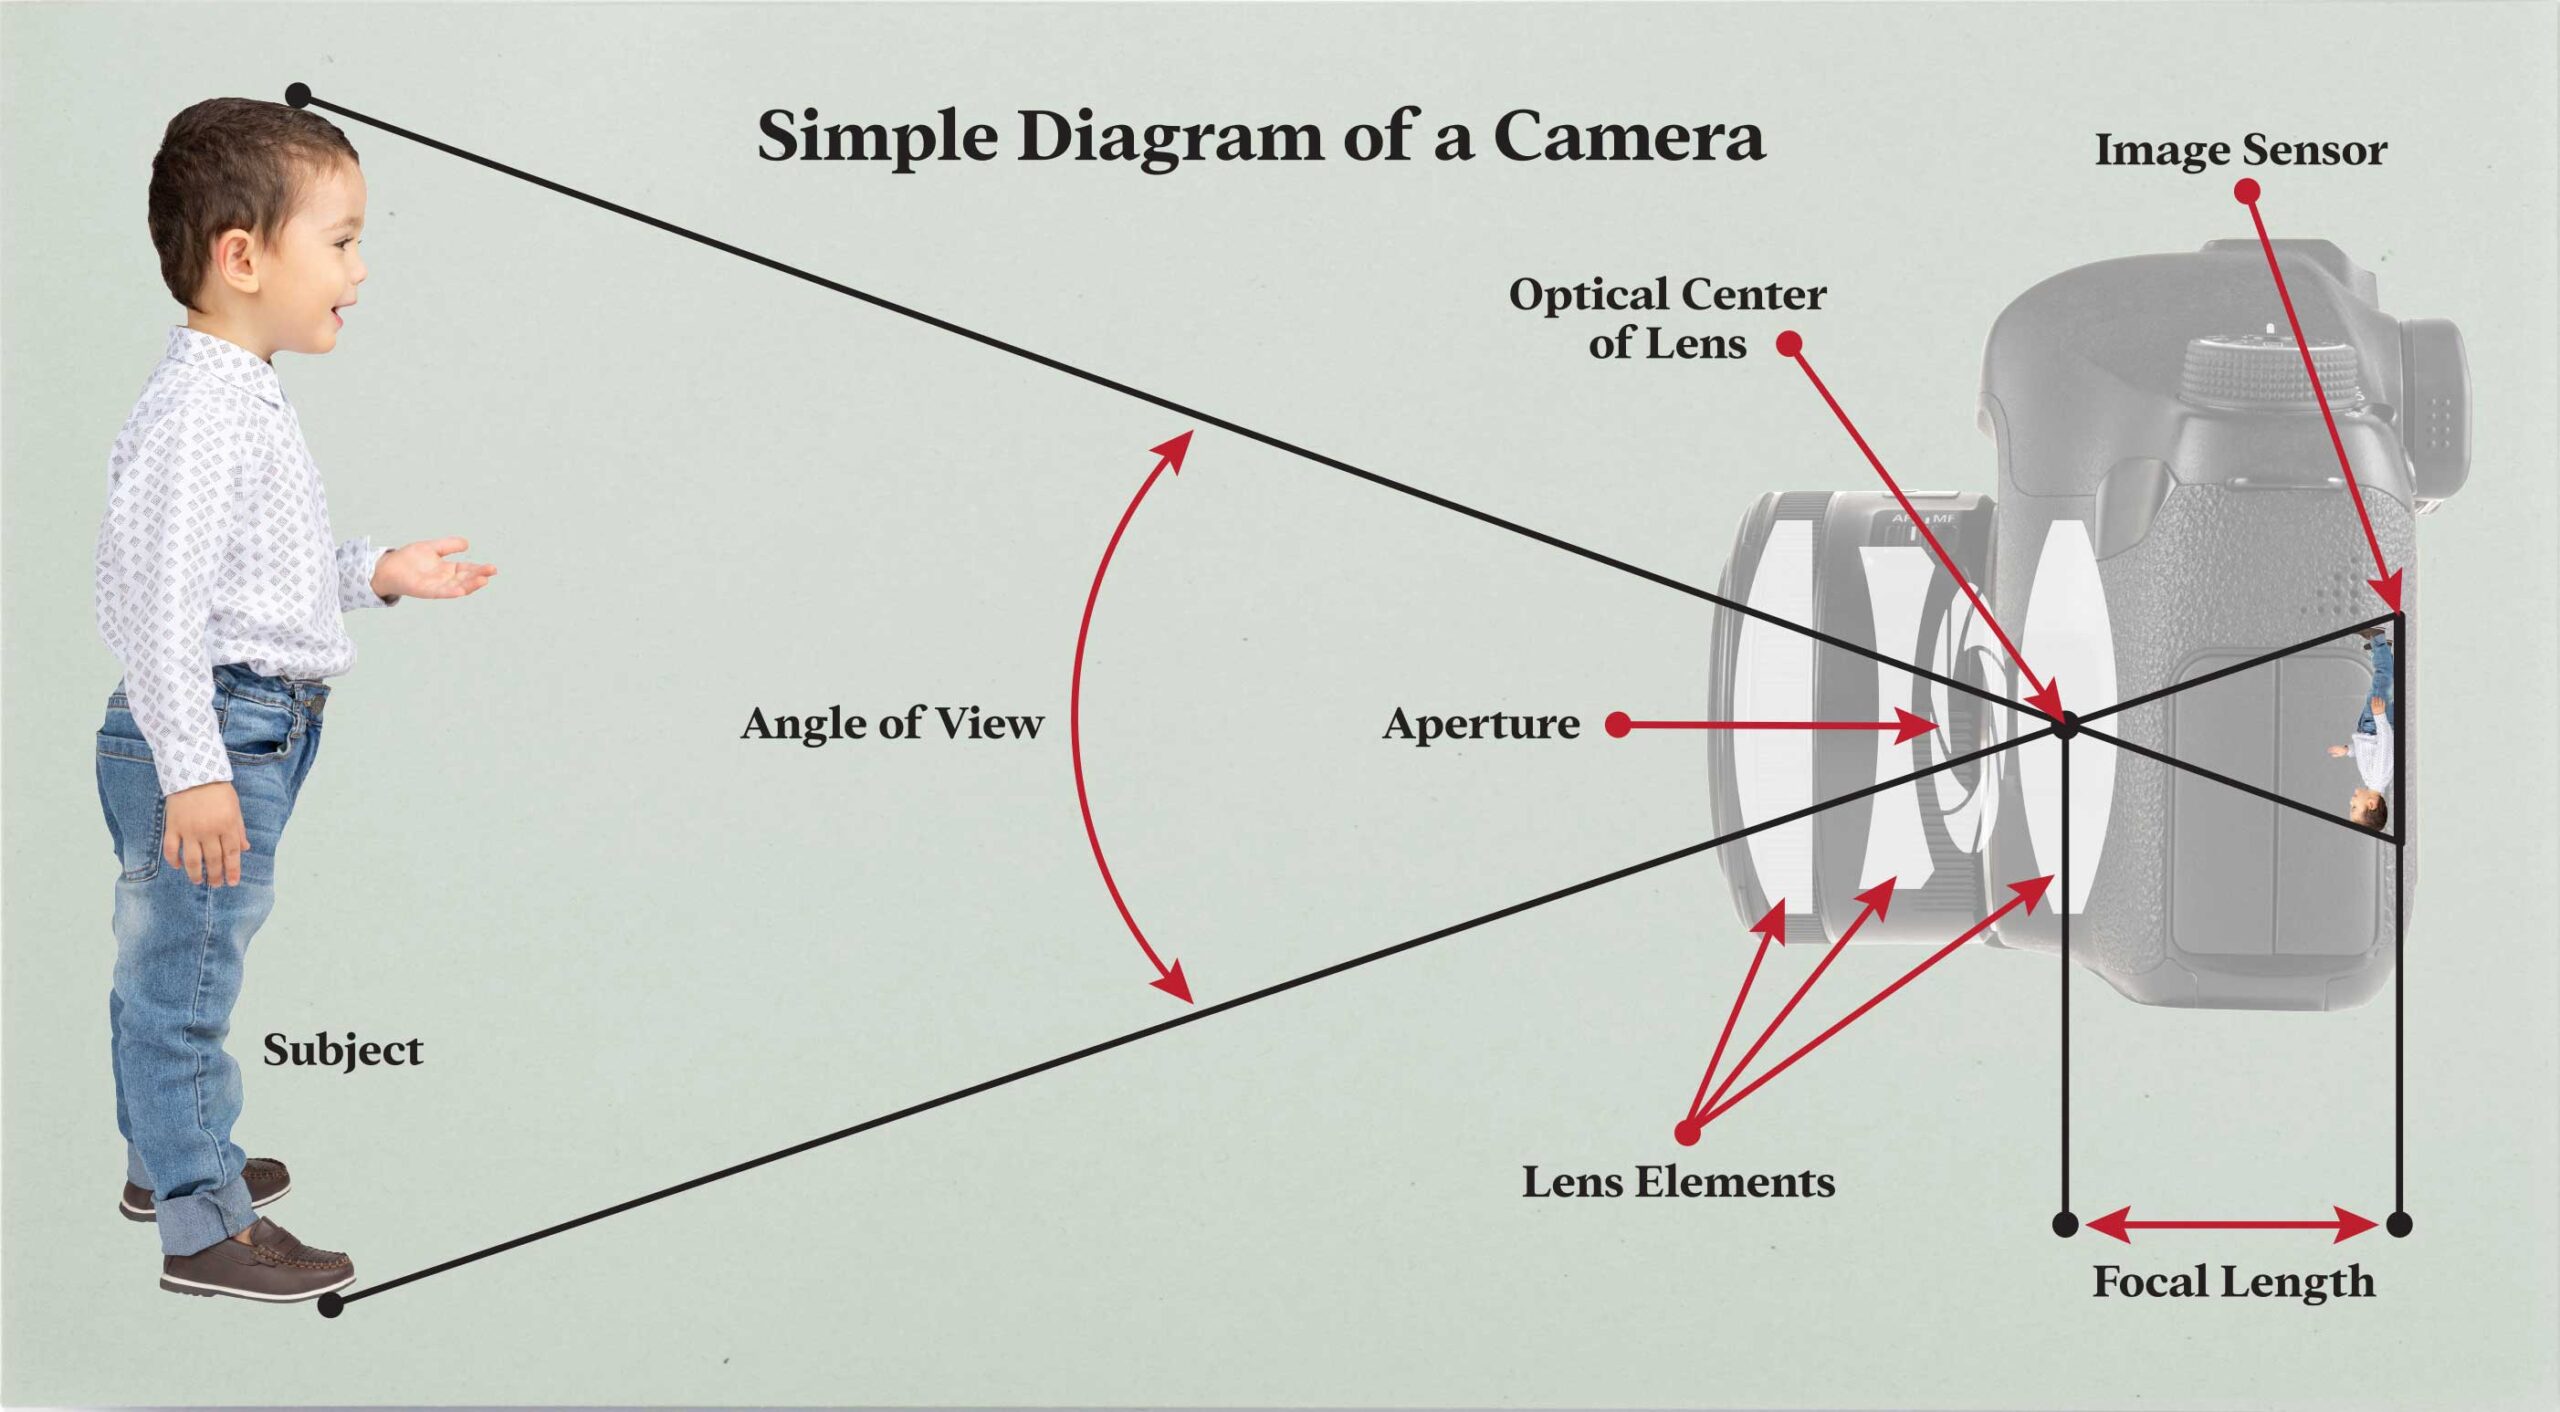 Diagram of the parts of a camera and how it sees a person